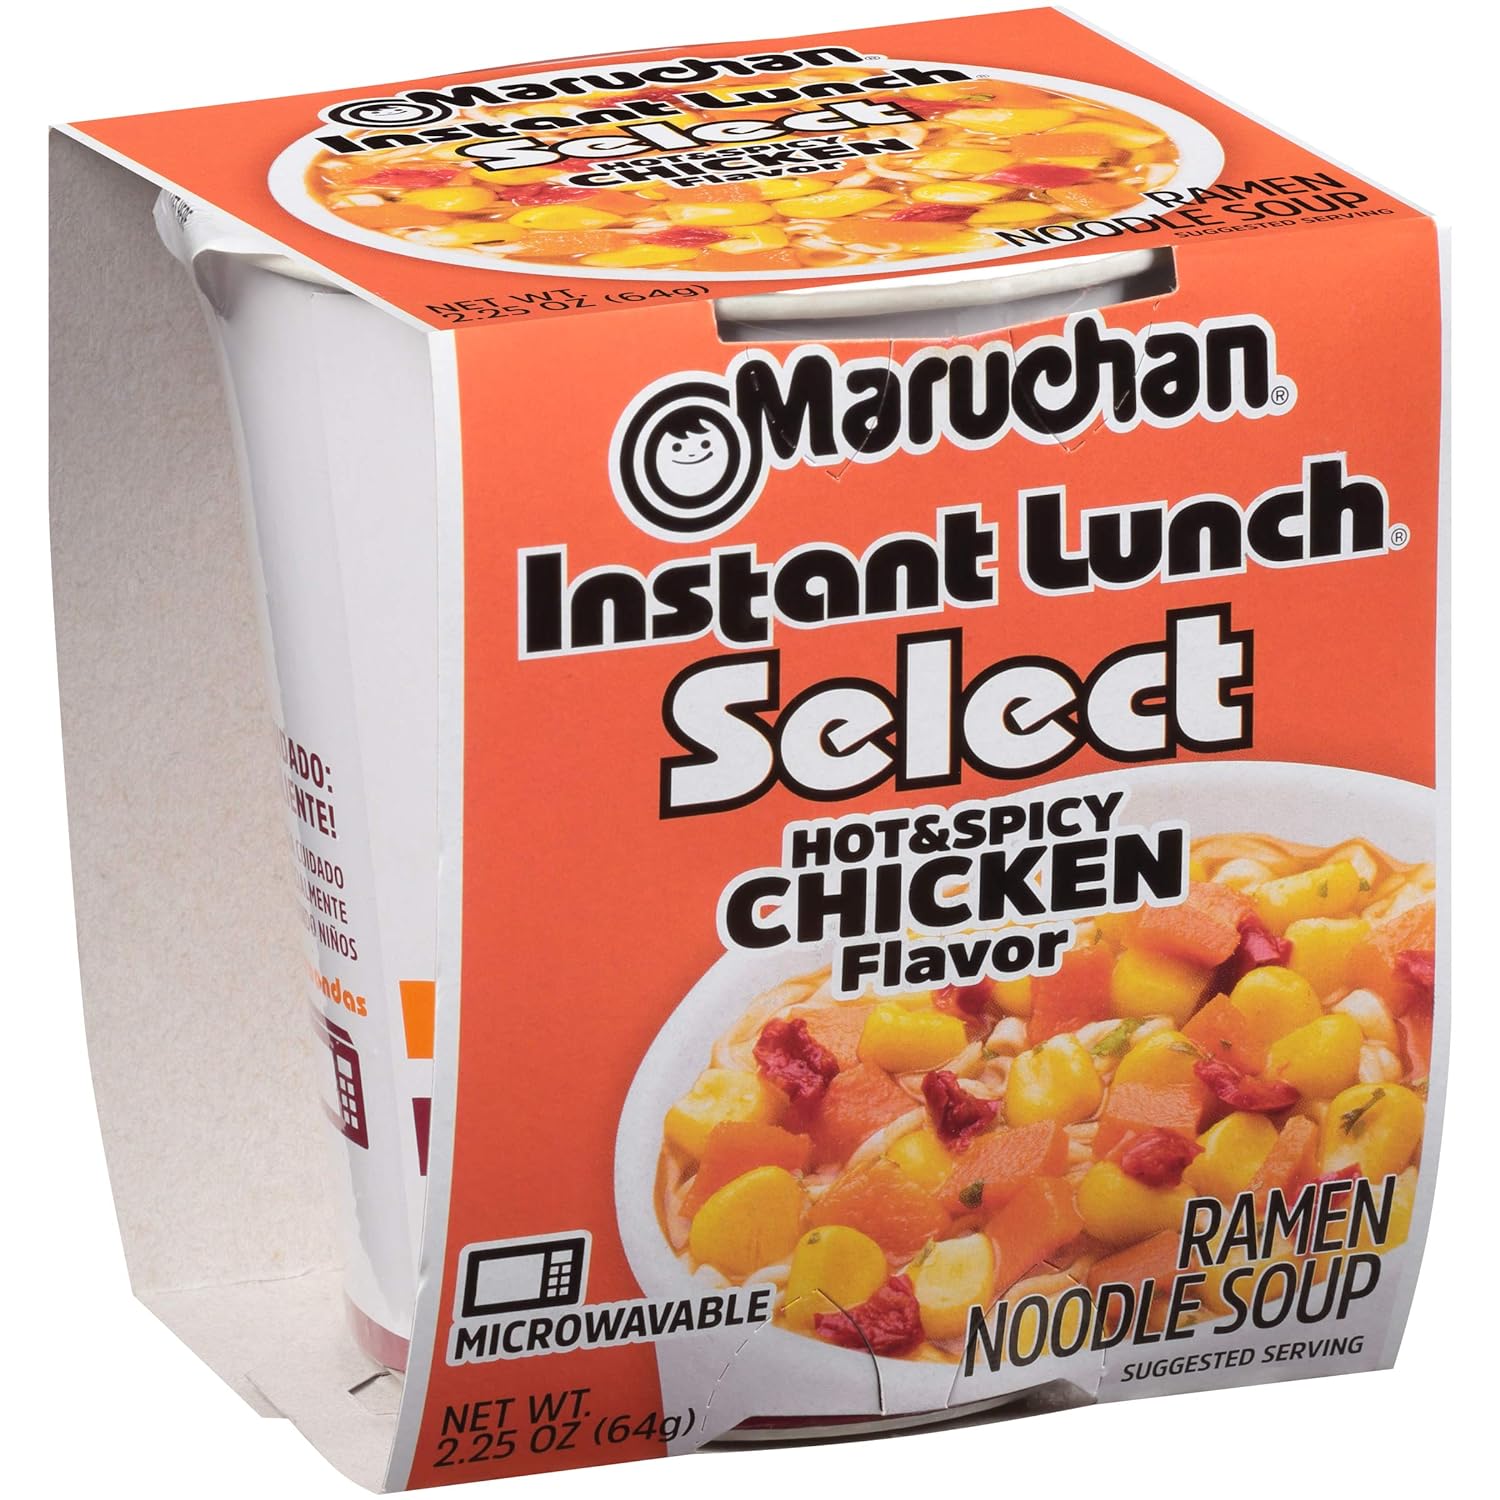 Maruchan Instant Lunch Select Hot and Spicy Chicken Flavor, 2.25 Oz, Pack of 12 : Grocery & Gourmet Food